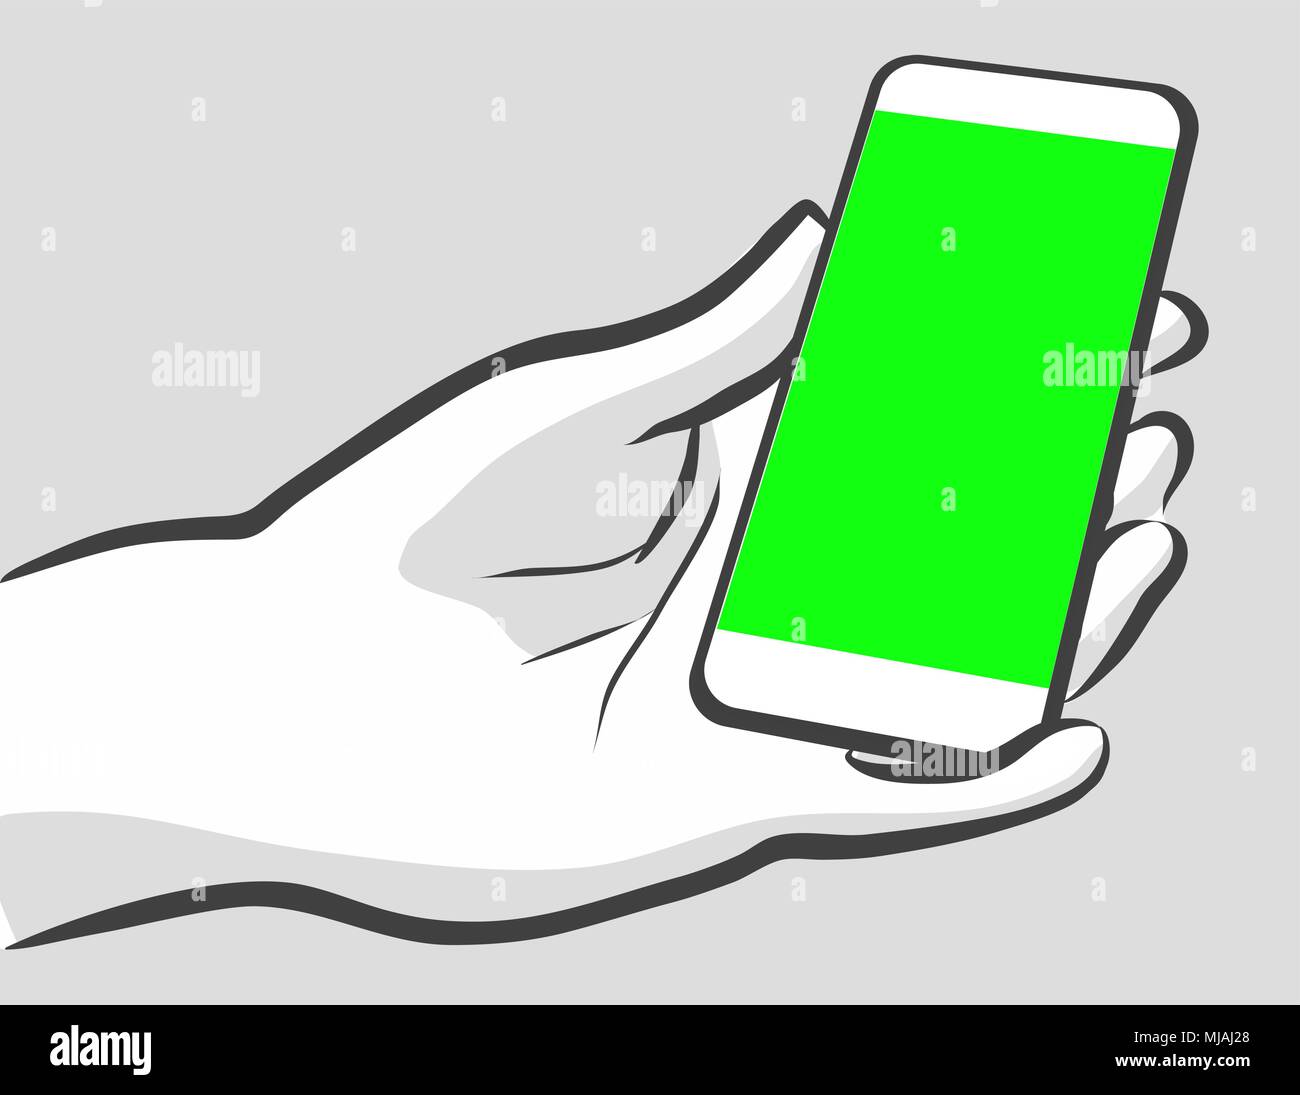 Holding Mobile in Portrit Mode. Hand Drawn Outline Artwork with Green Screen. Stock Vector